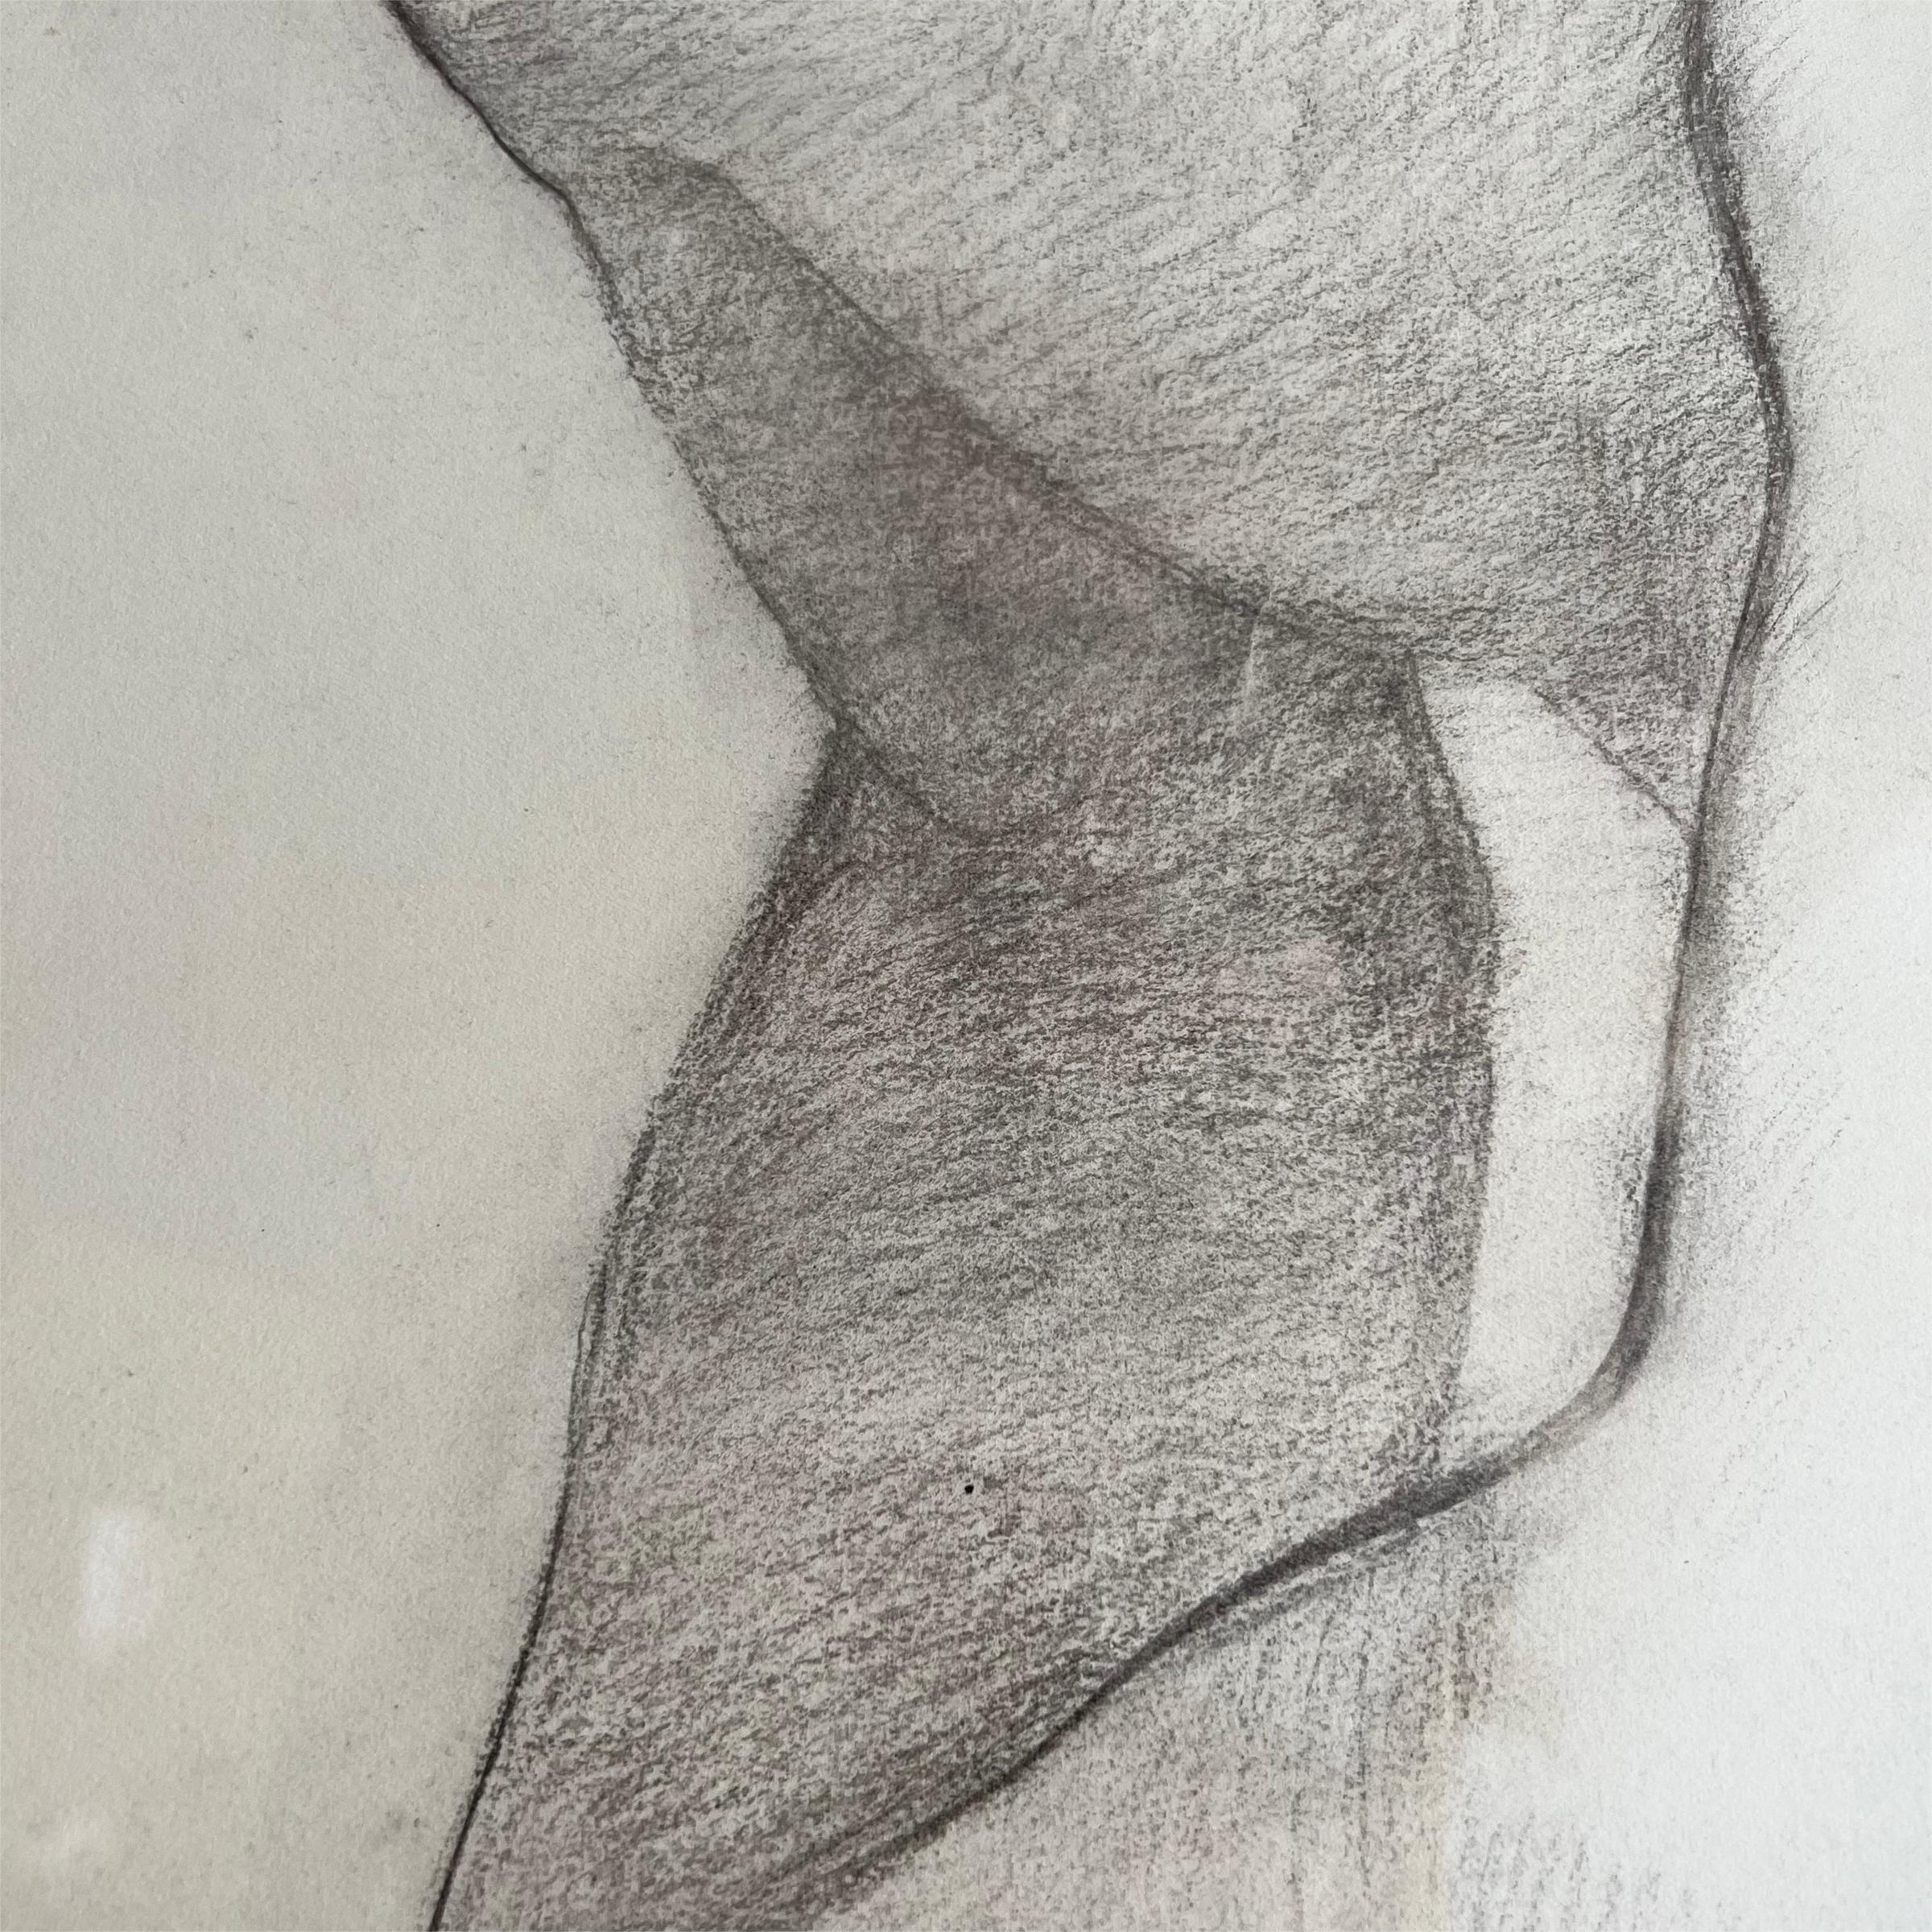 Monumental Mid-20th Century Belgian Academic Figure Drawing In Good Condition For Sale In Chicago, IL